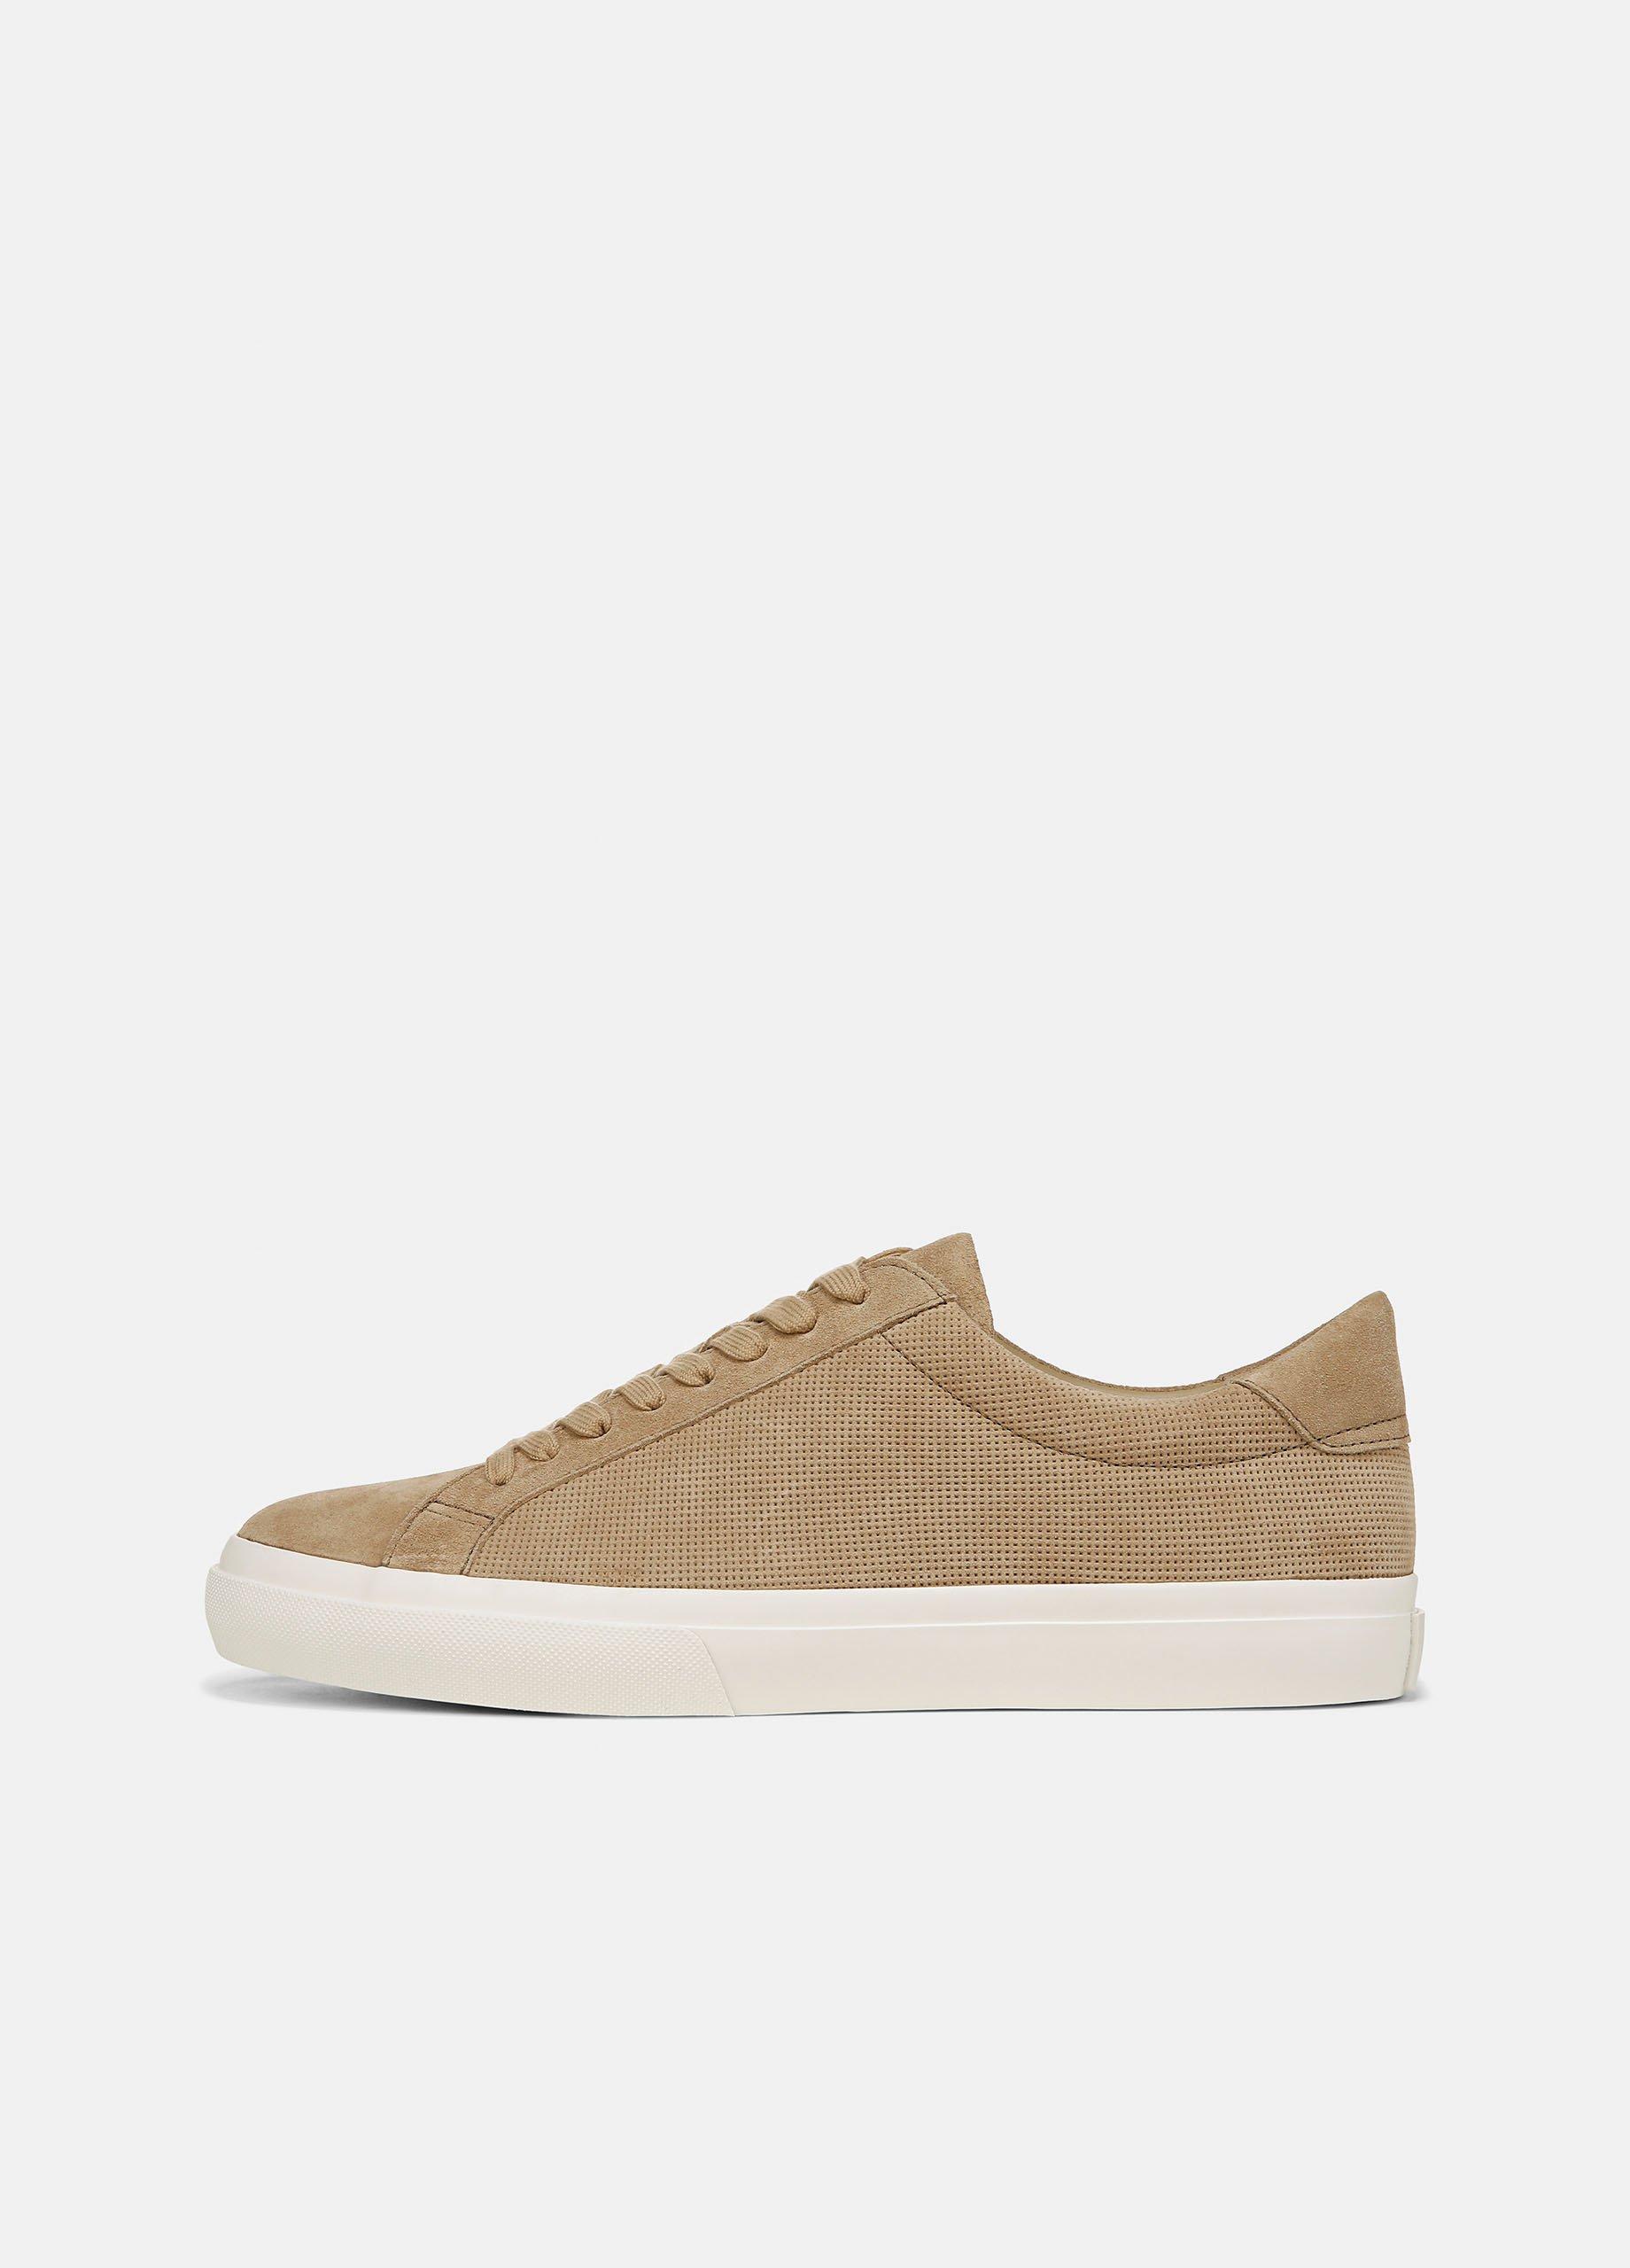 Fulton Perforated Suede Sneaker, Sand Trail, Size 9.5 Vince